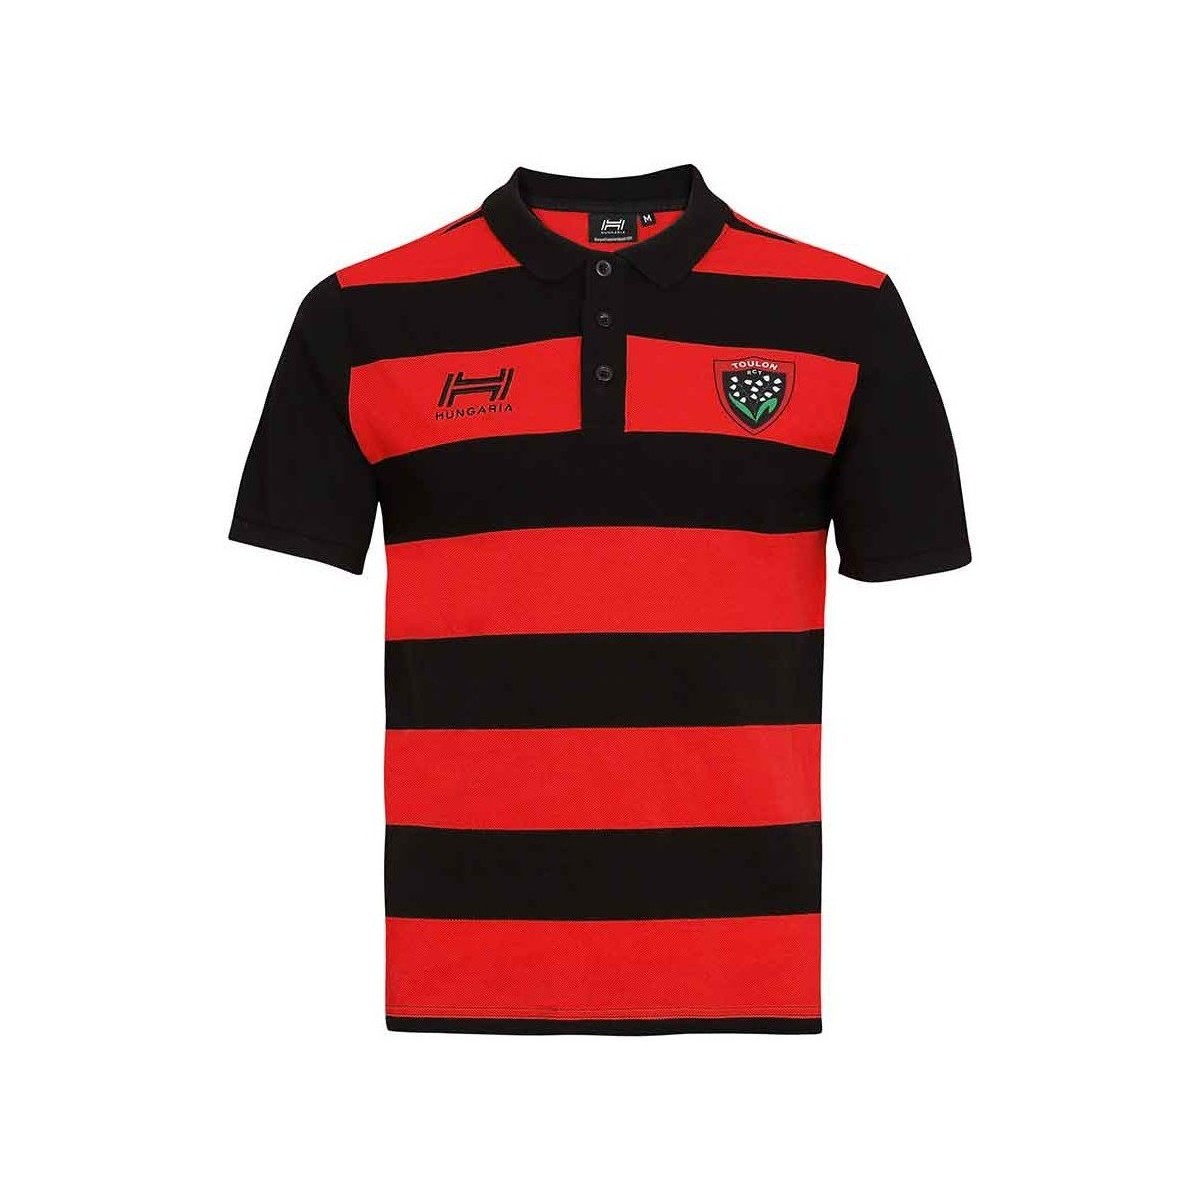 Vêtements T-shirts & Polos Hungaria POLO RUGBY RUGBY CLUB TOULONNA Noir